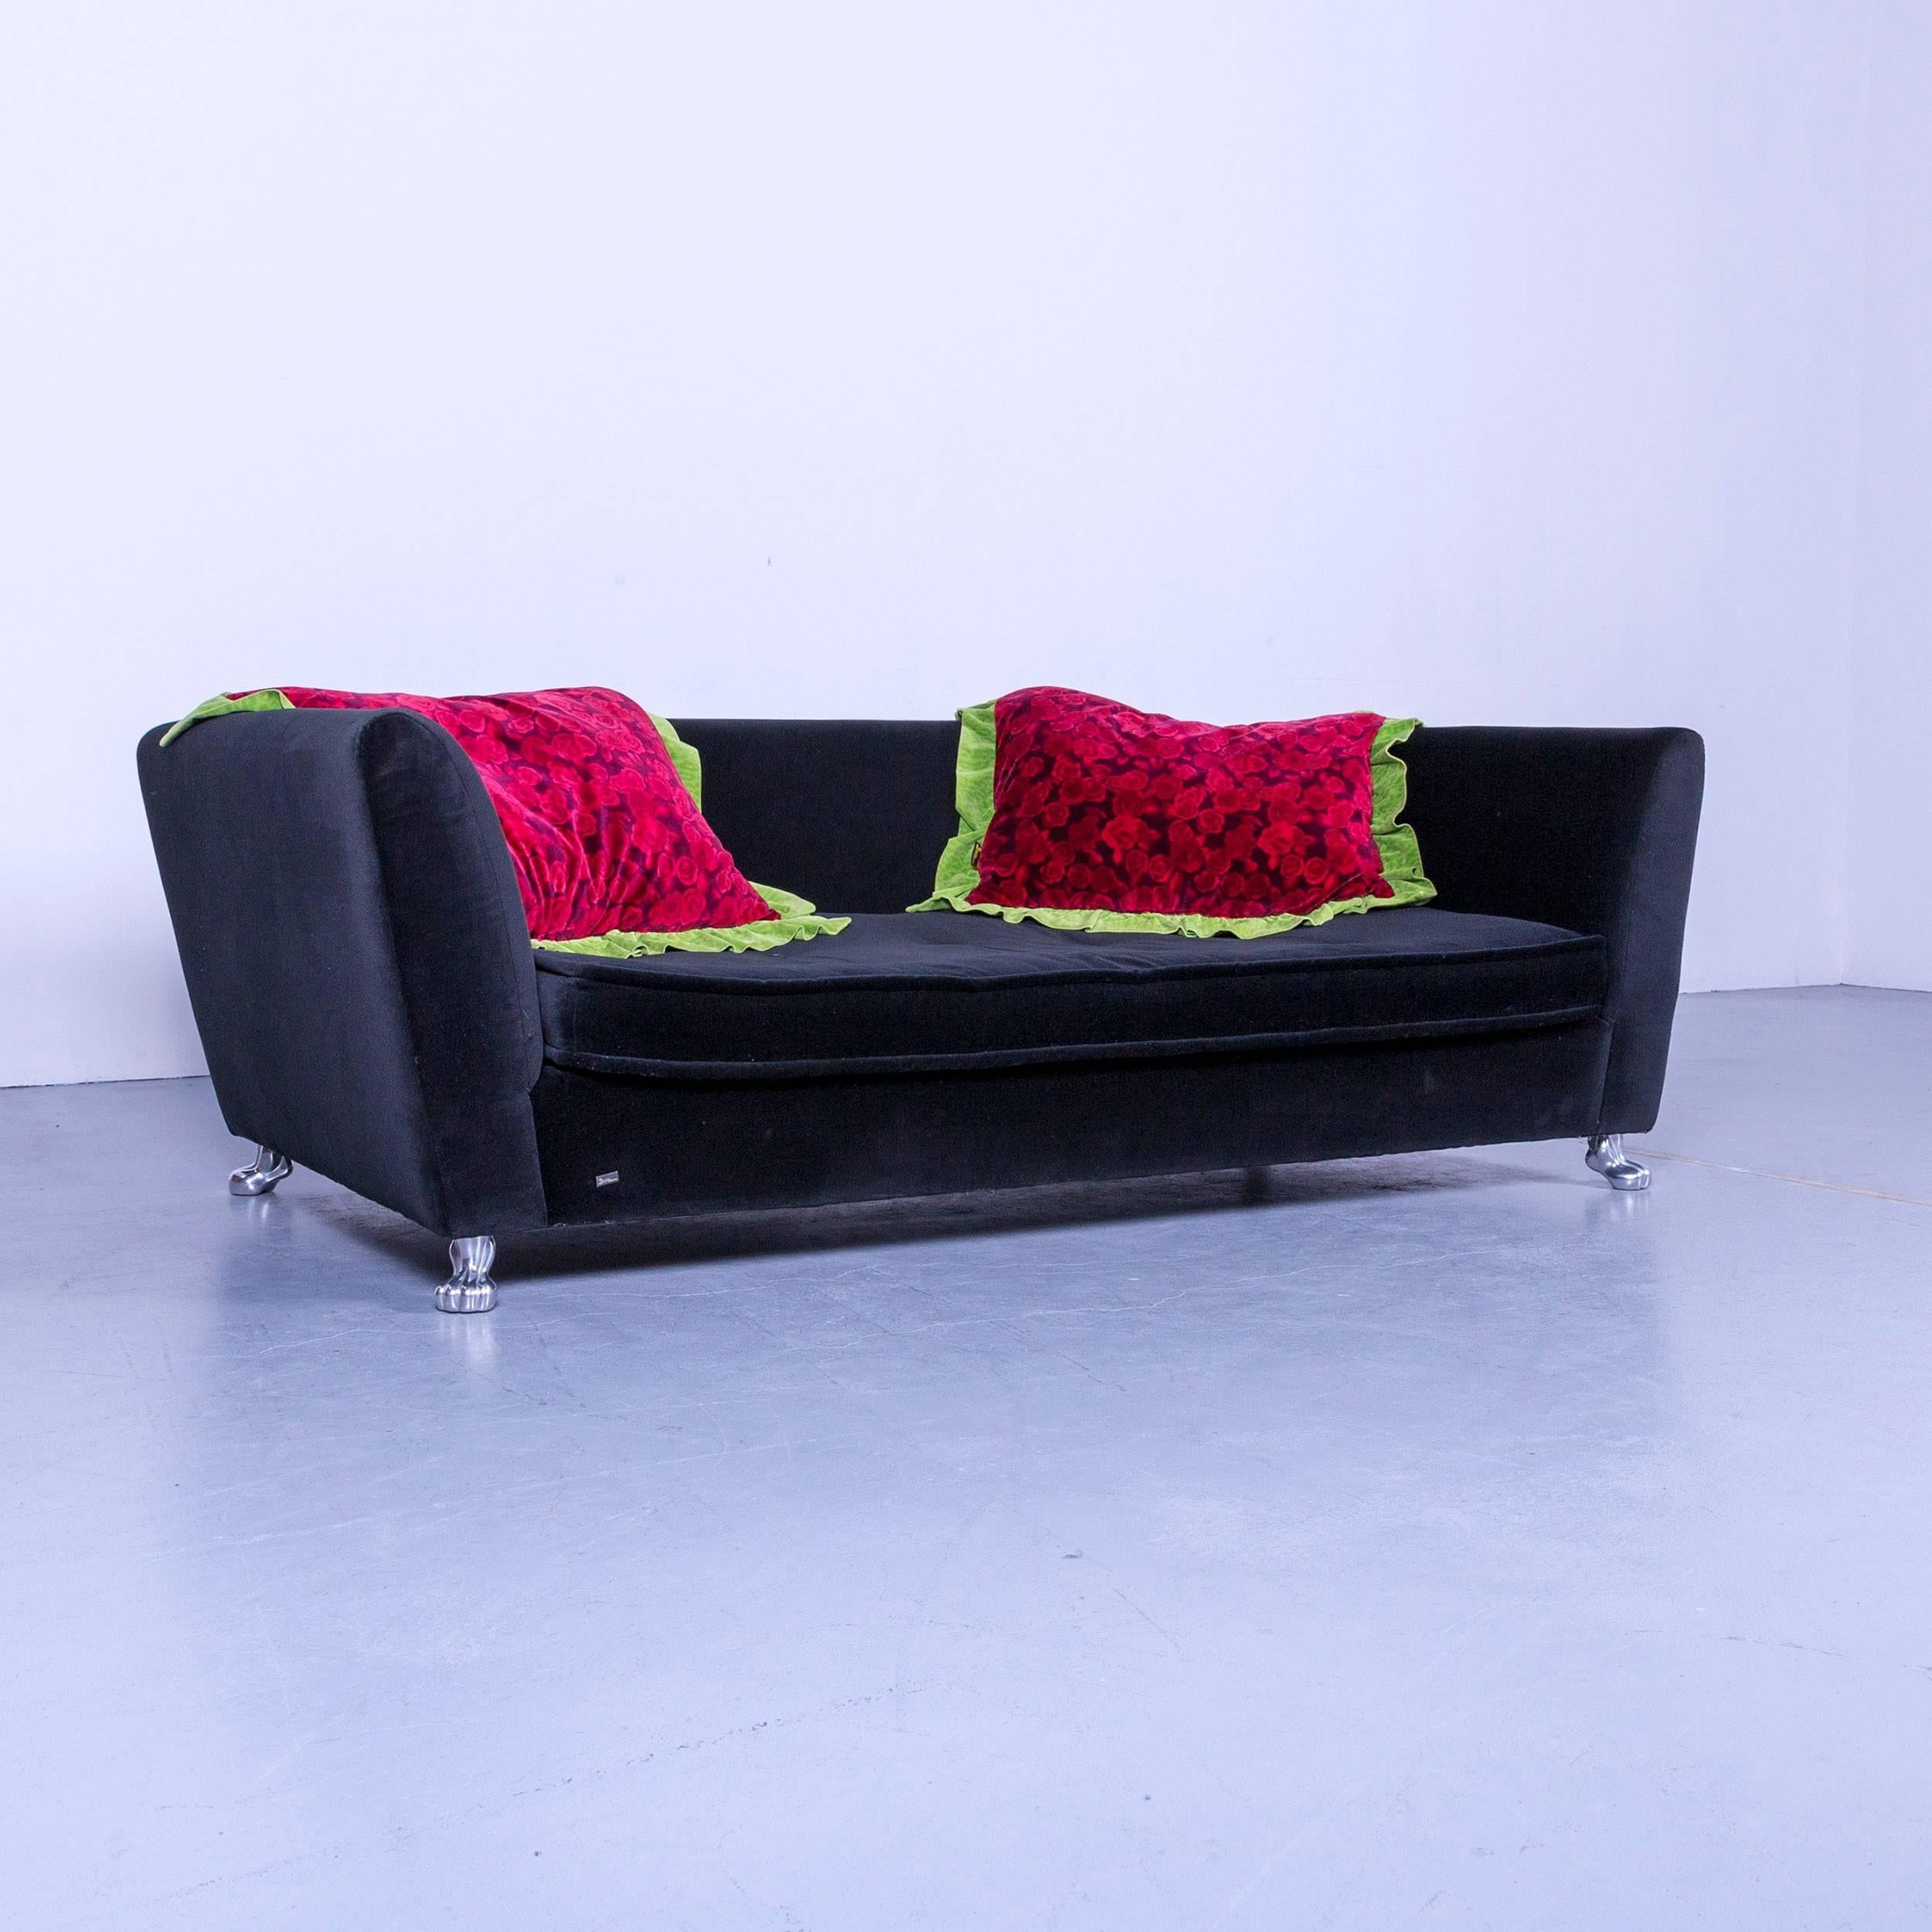 We offer delivery options to most destinations on earth. Find our shipping quotes at the bottom of this page in the shipping section.

An Bretz Monster Sofa Velvet Fabric Black Three-Seater Chaise Longue

Shipping:

An on point shipping process is